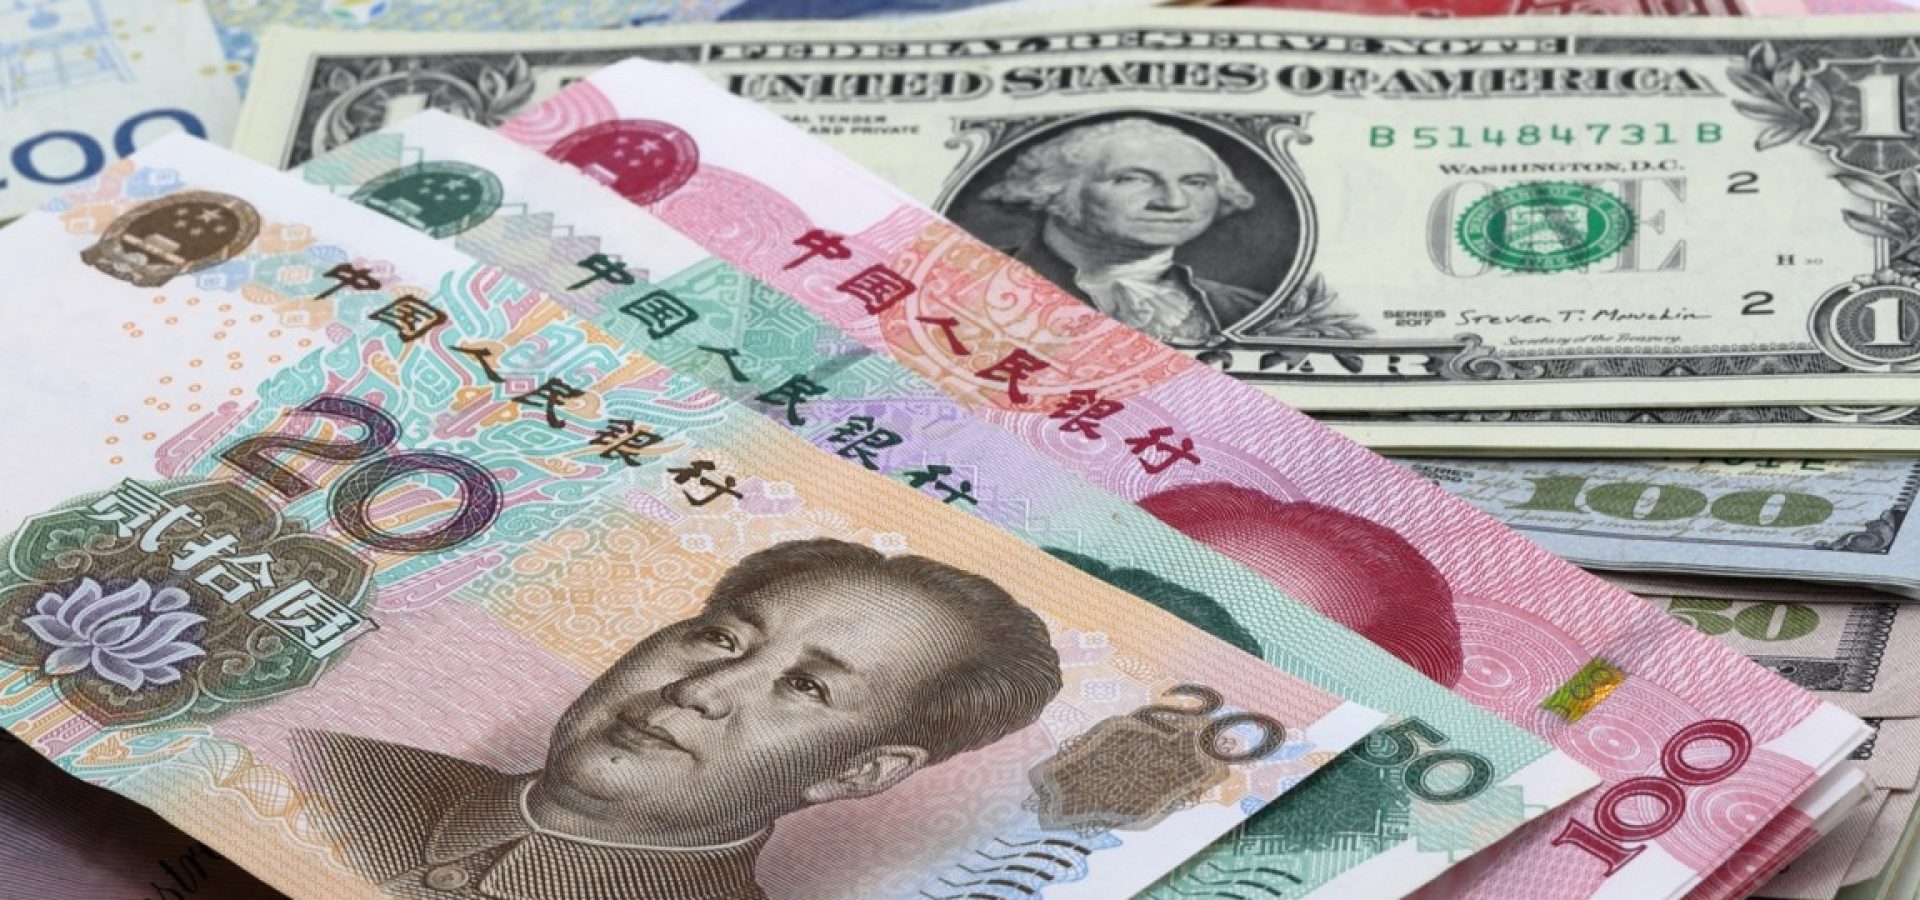 Japanese Yen fell due to an Optimistic Forecast about China